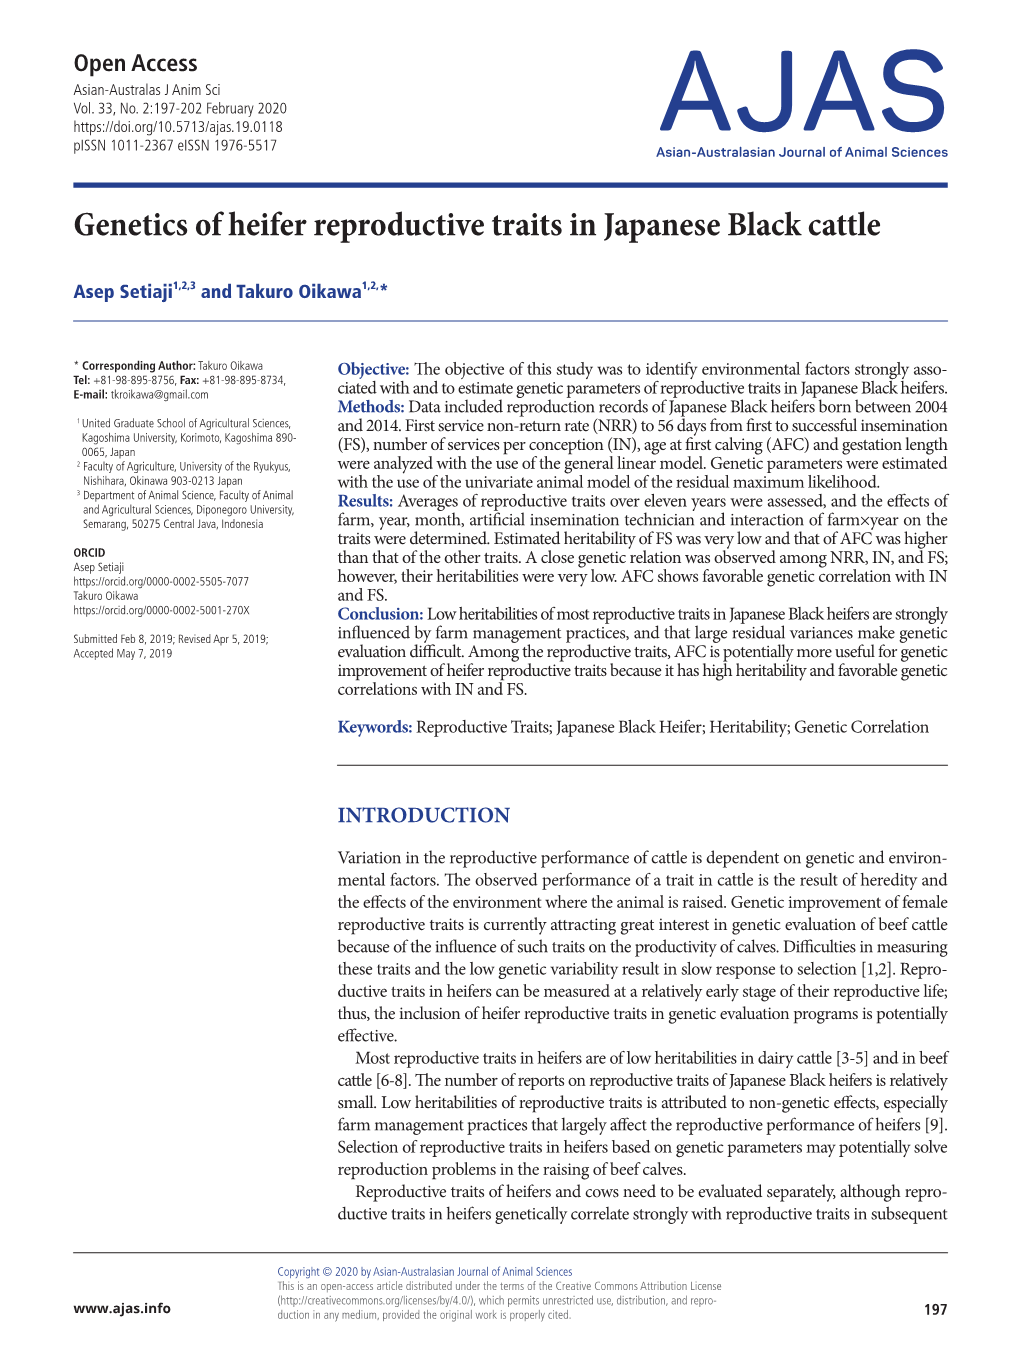 Genetics of Heifer Reproductive Traits in Japanese Black Cattle